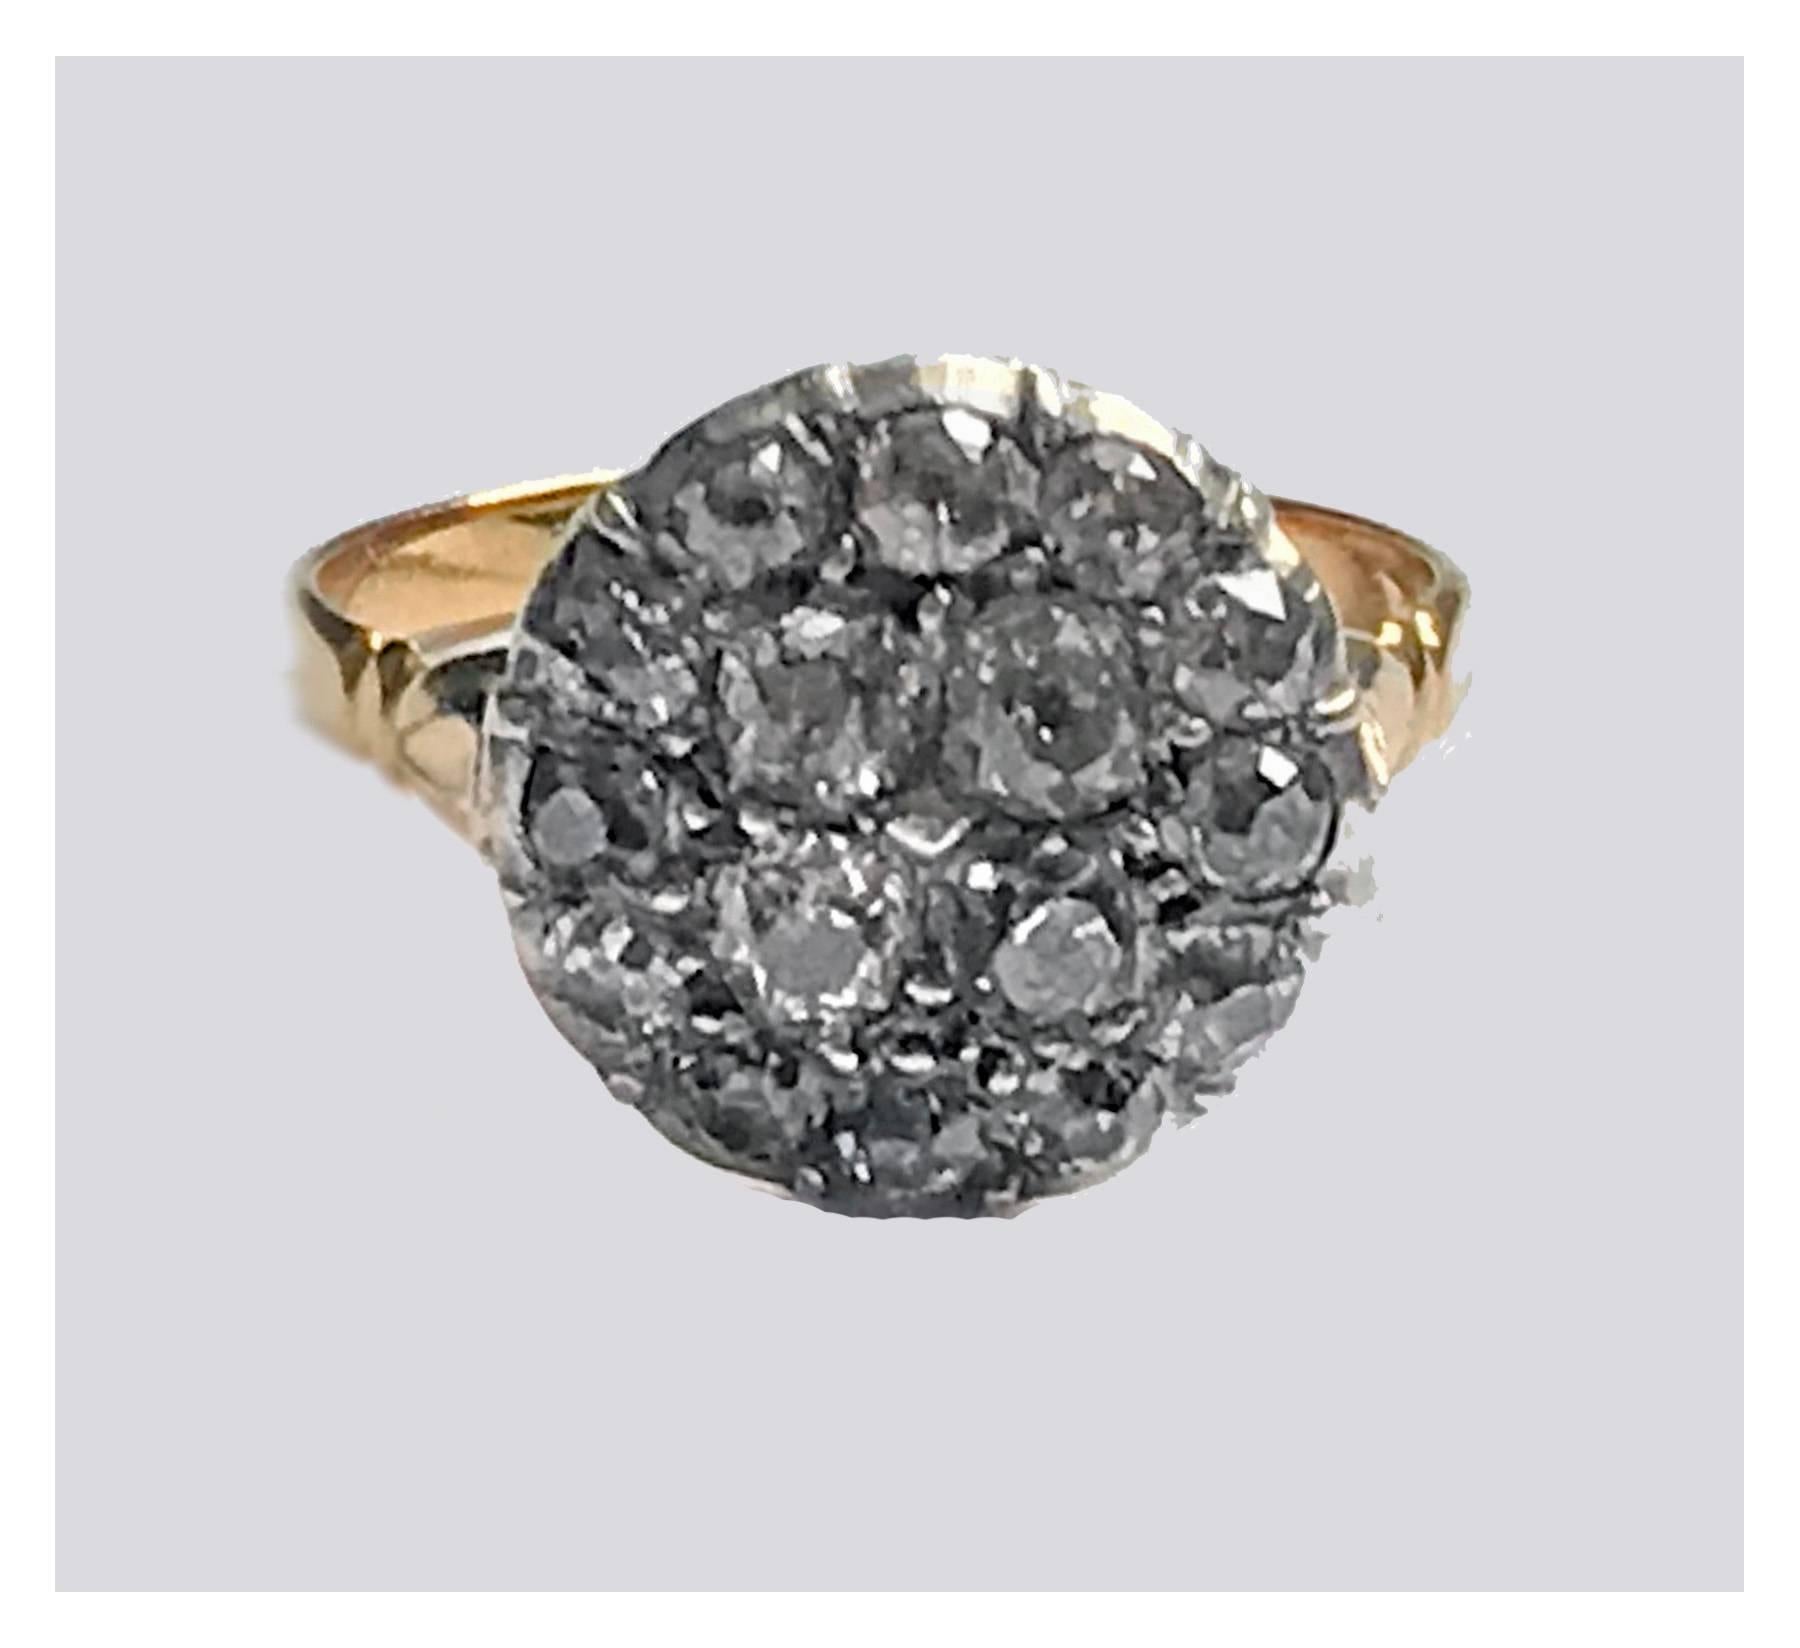 Georgian Diamond cluster Ring, English C.1800. The Diamond cluster set with sixteen old cut diamonds, closed back setting, split shoulders, double reed shank. Ring Size: 8. Total Item Weight: 4.45 grams. Stamped 18ct on interior of shank. 